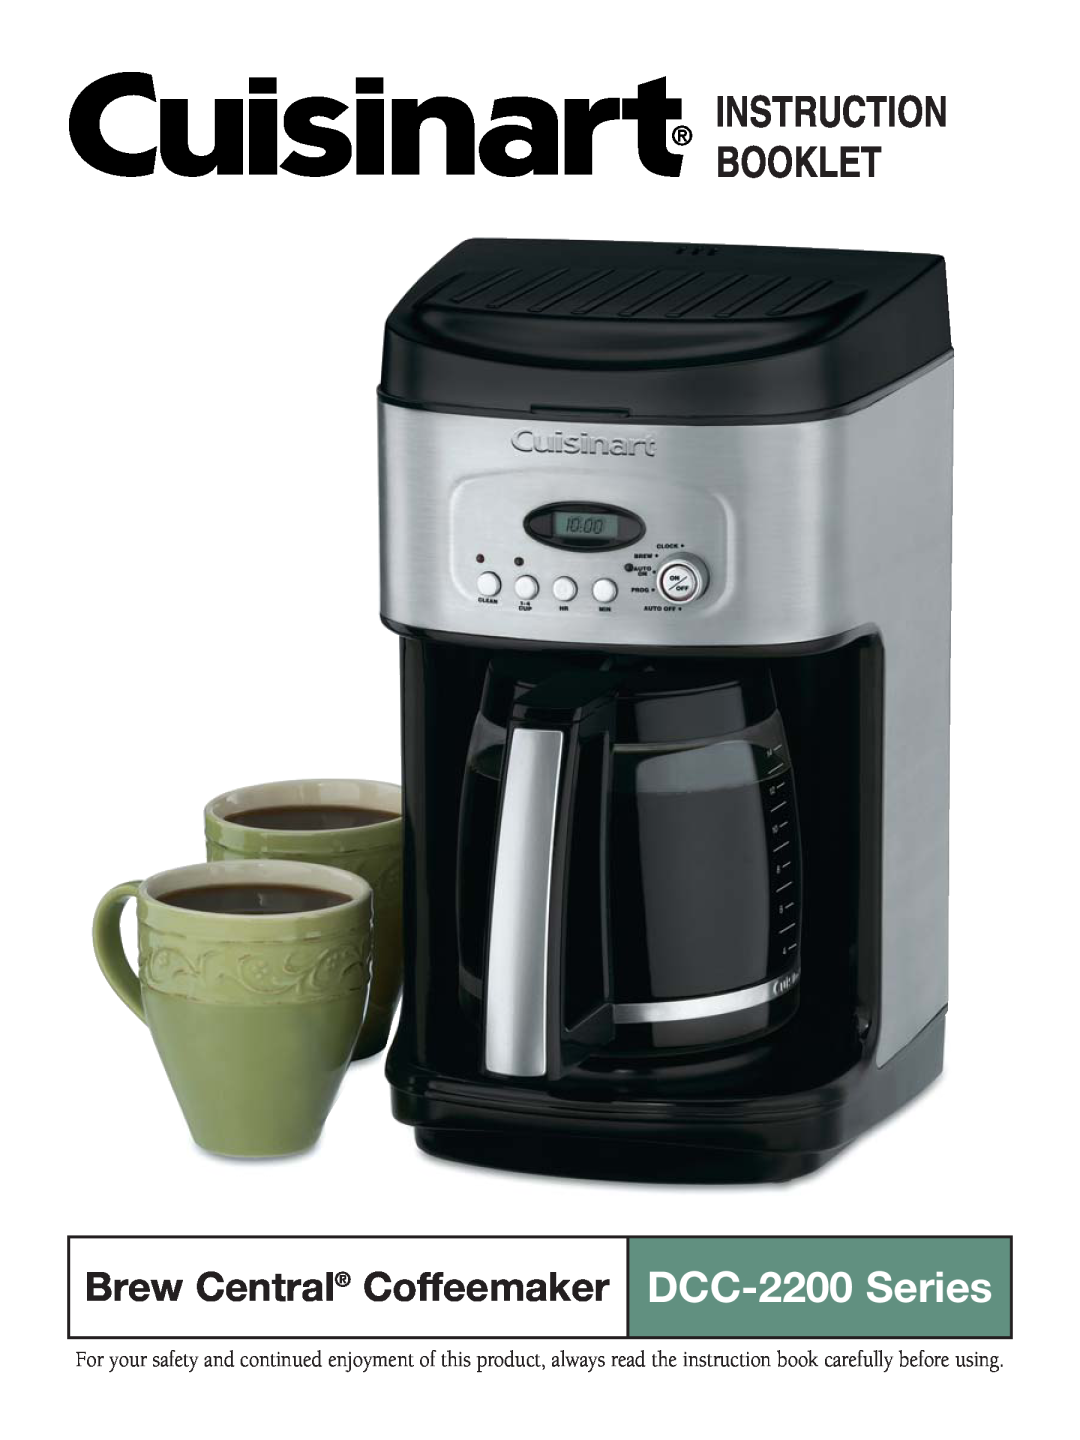 Cuisinart manual DCC-2200 Series, Brew Central Coffeemaker, Instruction Booklet 